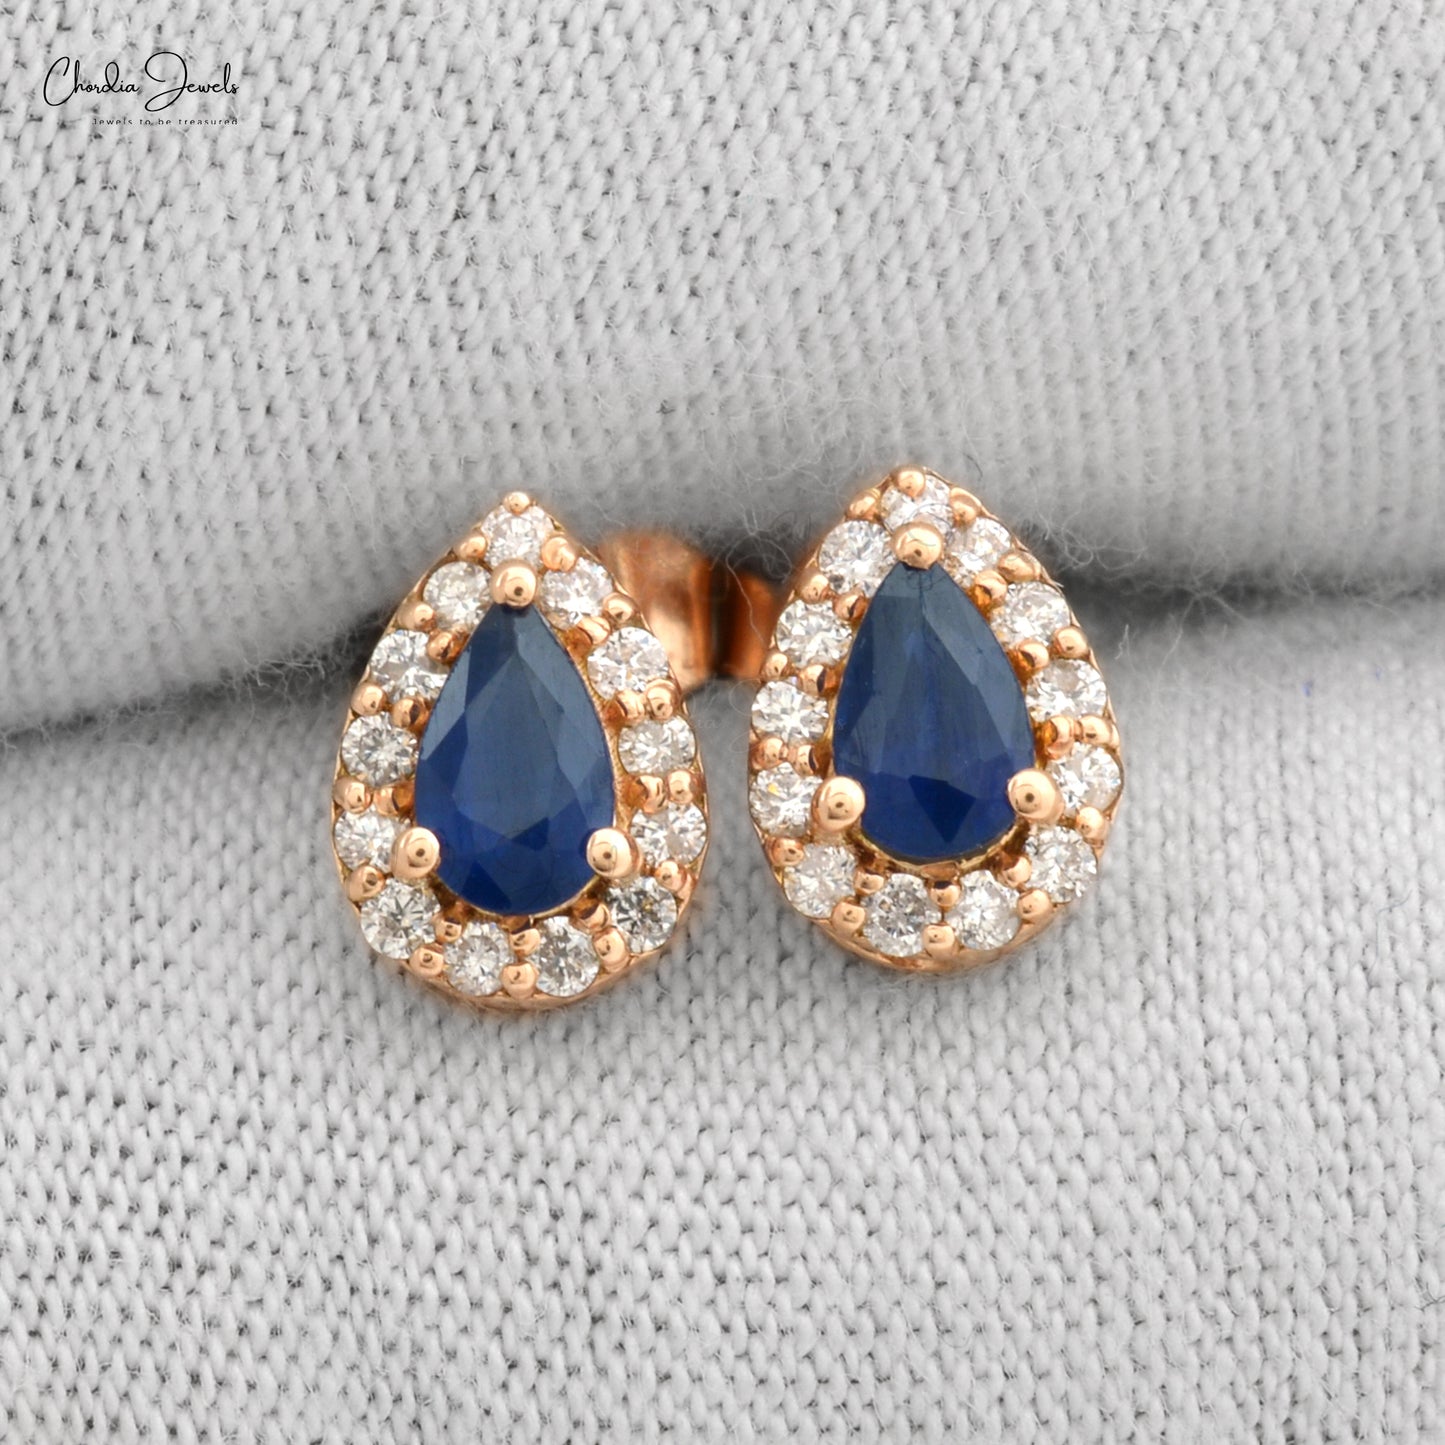 Natural Blue Sapphire Diamond Halo Studs Earrings 6x4mm Pear Cut Gemstone Earrings 14k Solid Gold Prong Set Earrings For Her